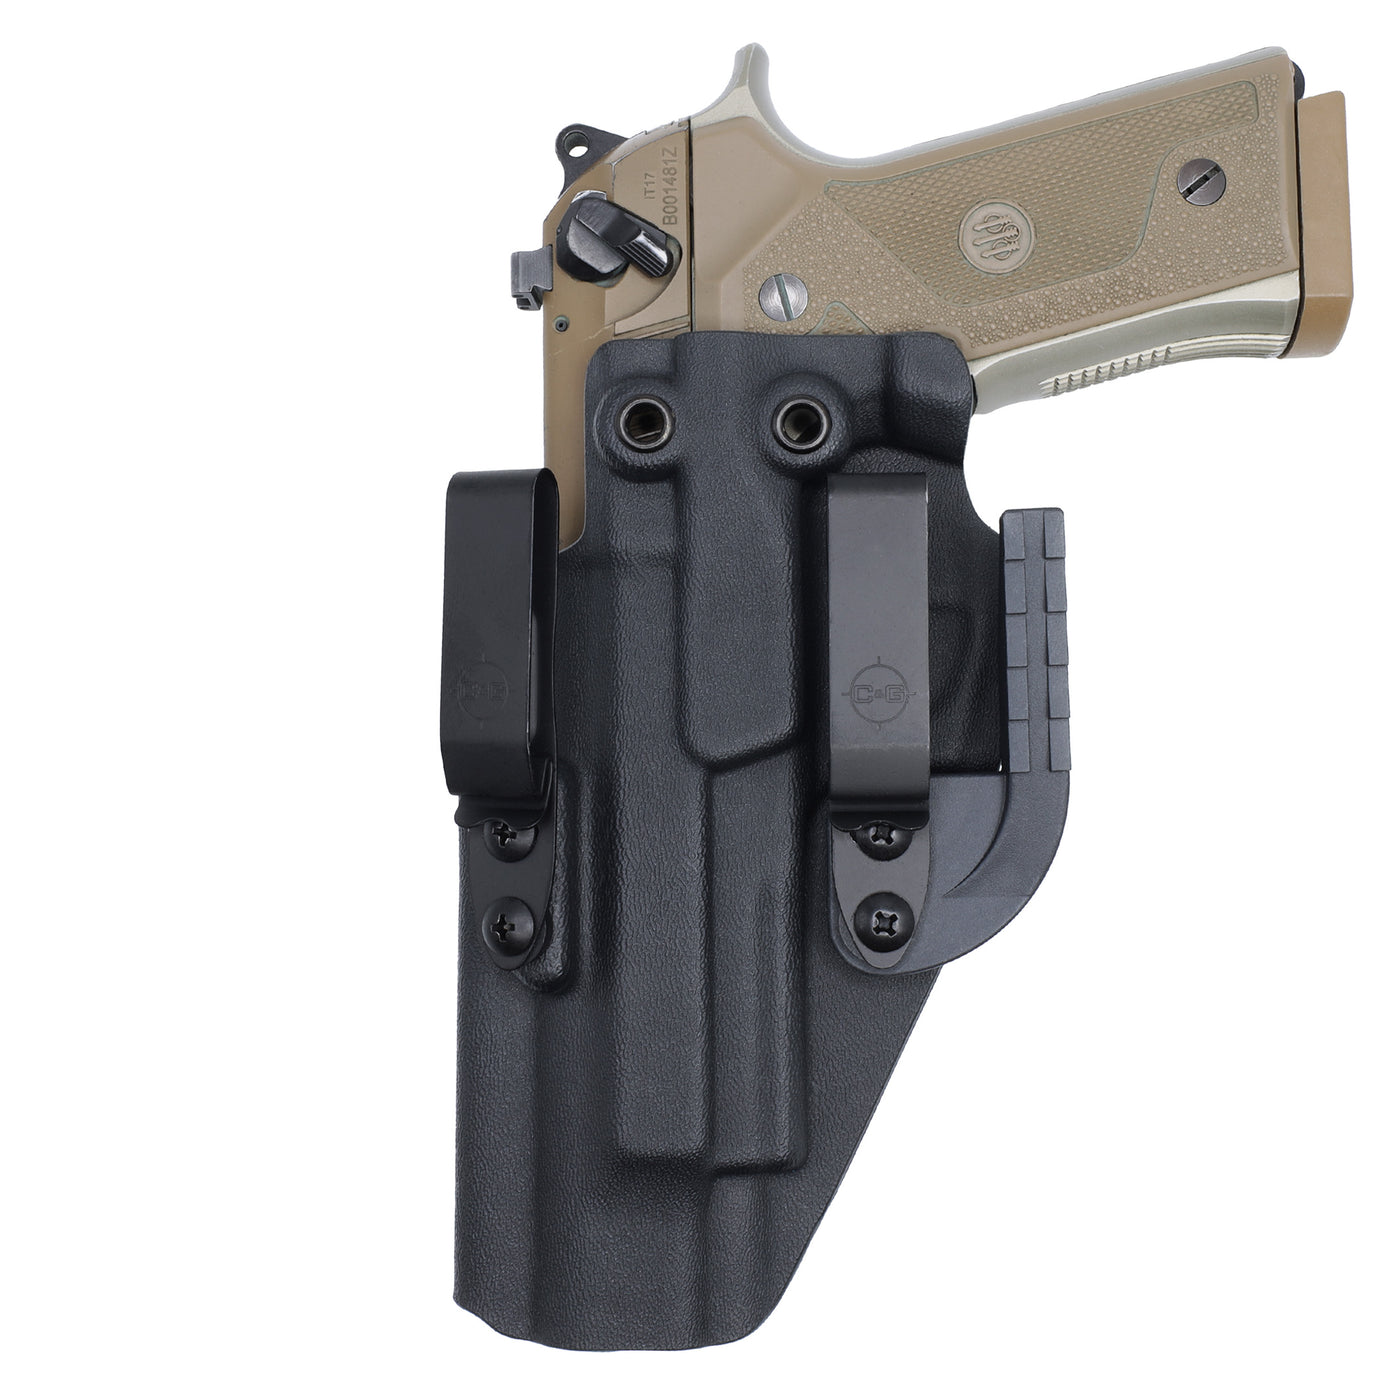 ALPHA Upgraded Holster Left Hand Front View with Gun